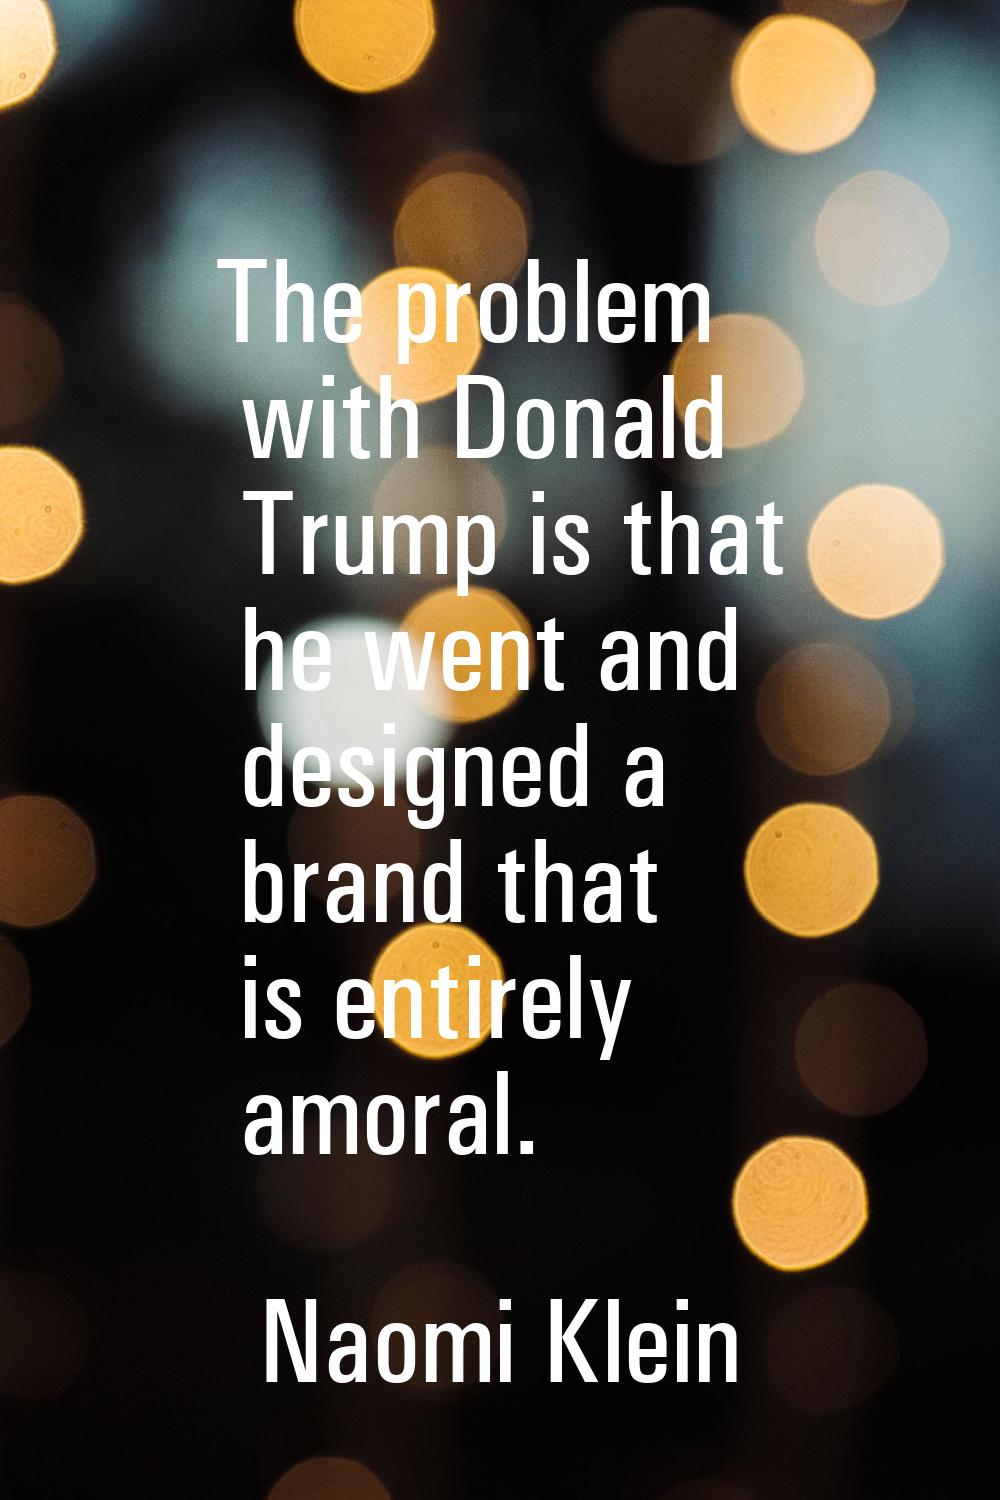 The problem with Donald Trump is that he went and designed a brand that is entirely amoral.